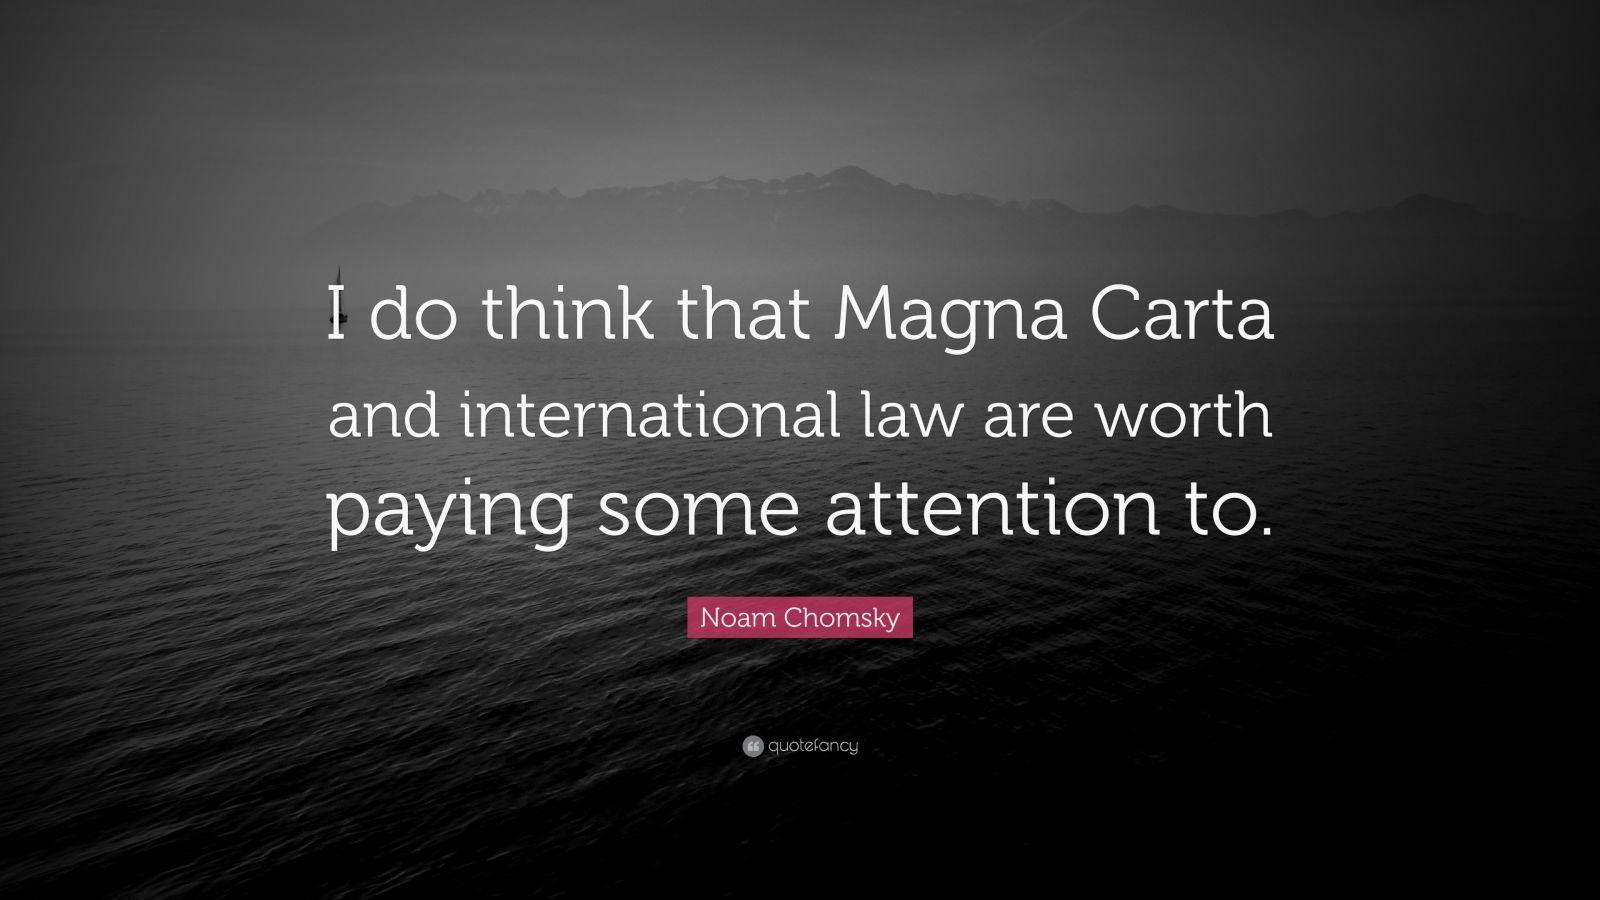 Noam Chomsky Quote: “I do think that Magna Carta and international law